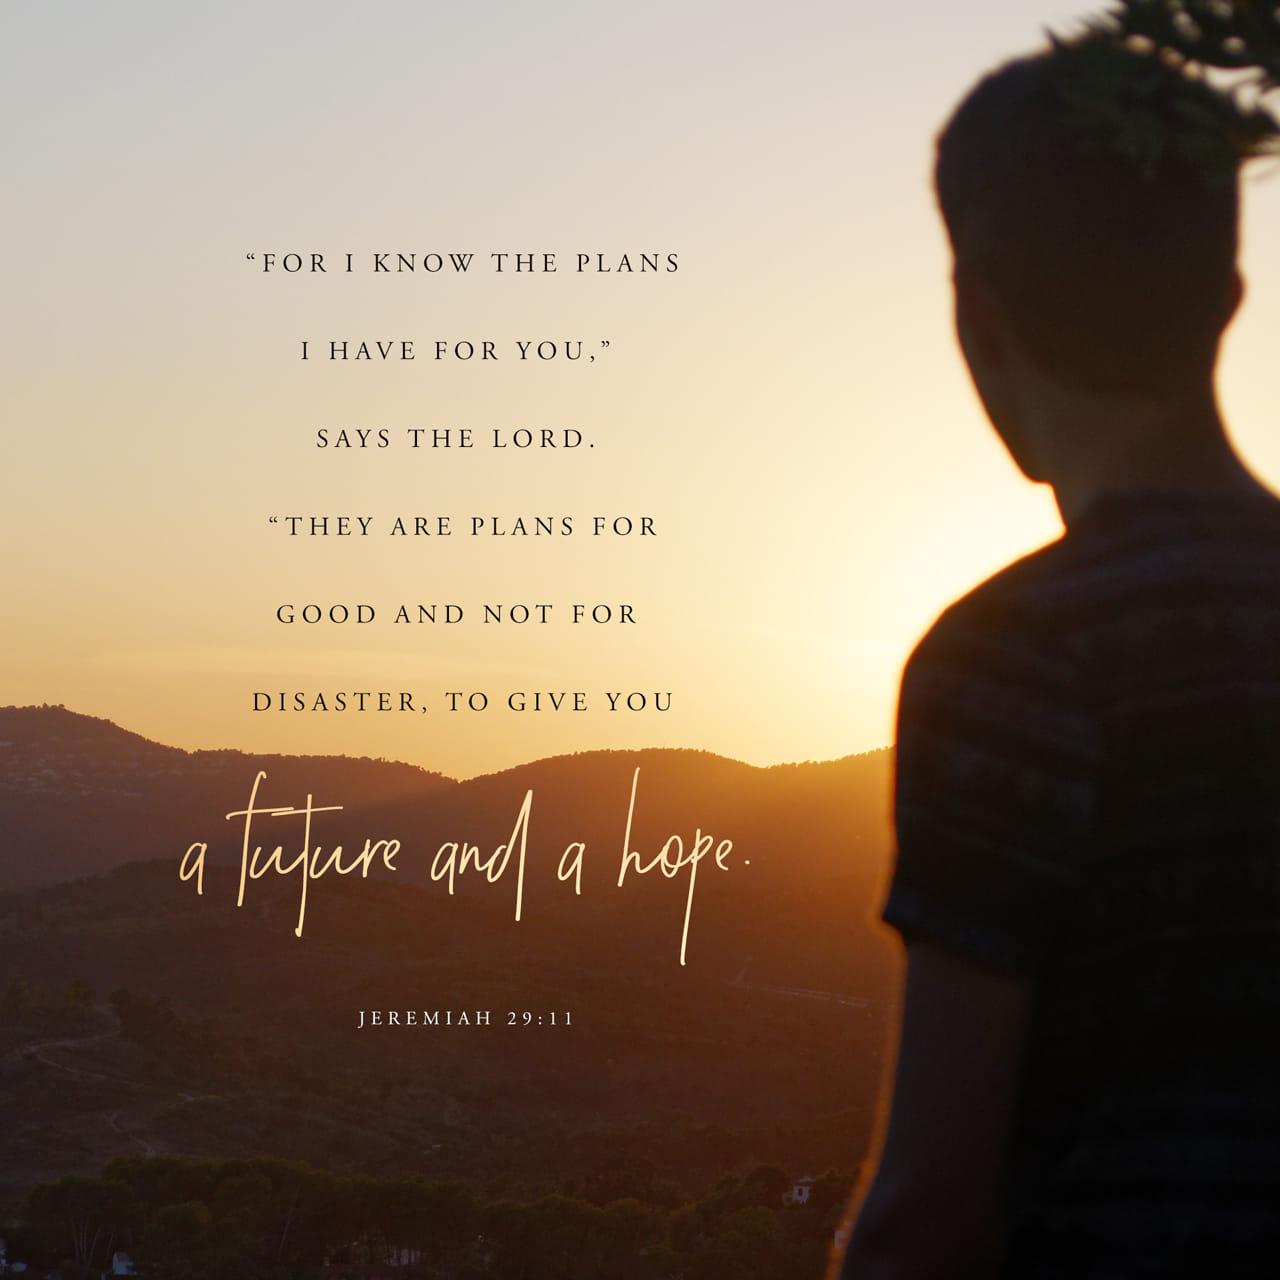 Bible Verse of the Day - day 83 - image 23013 (Jeremiah 29:11)